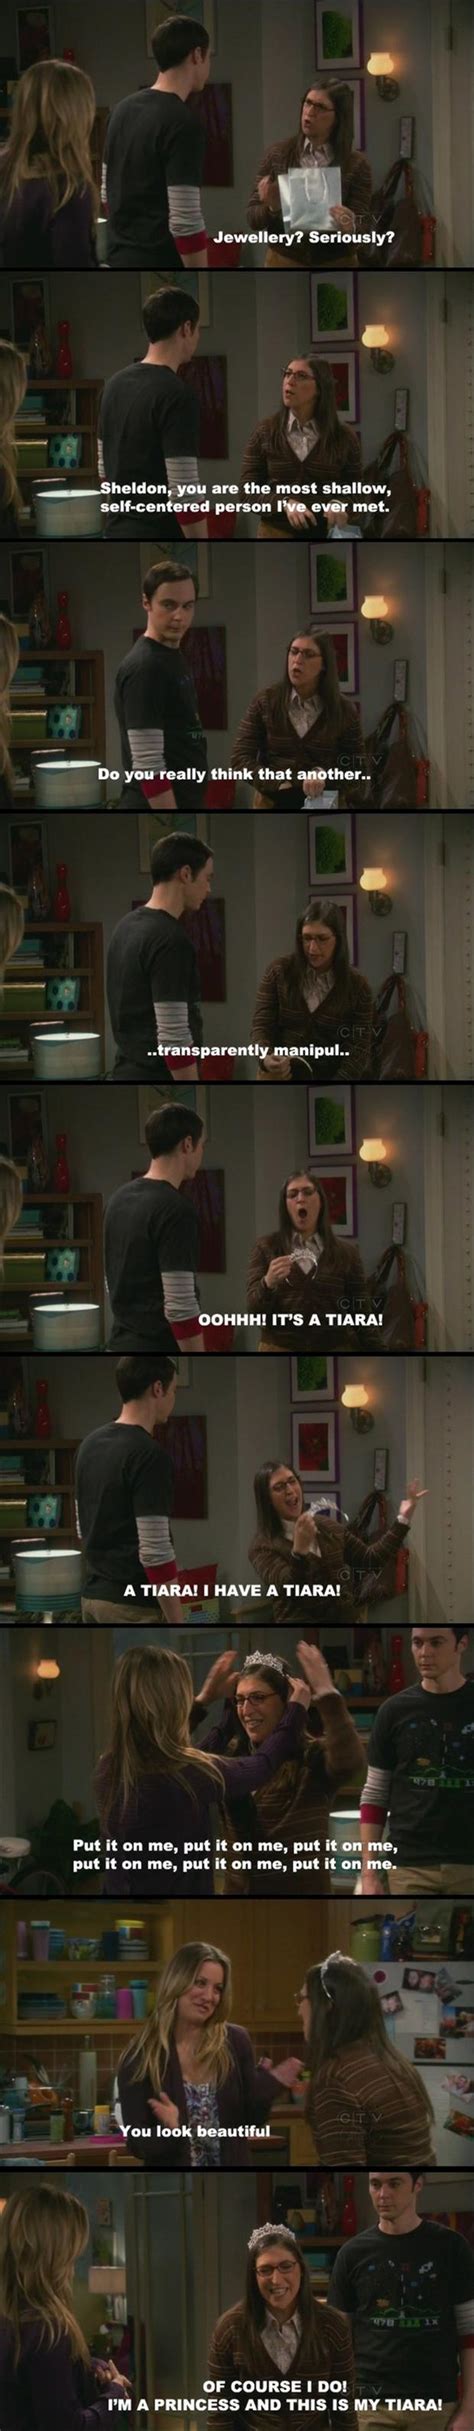 15 Funny Quotes And Pictures From Big Bang Theory